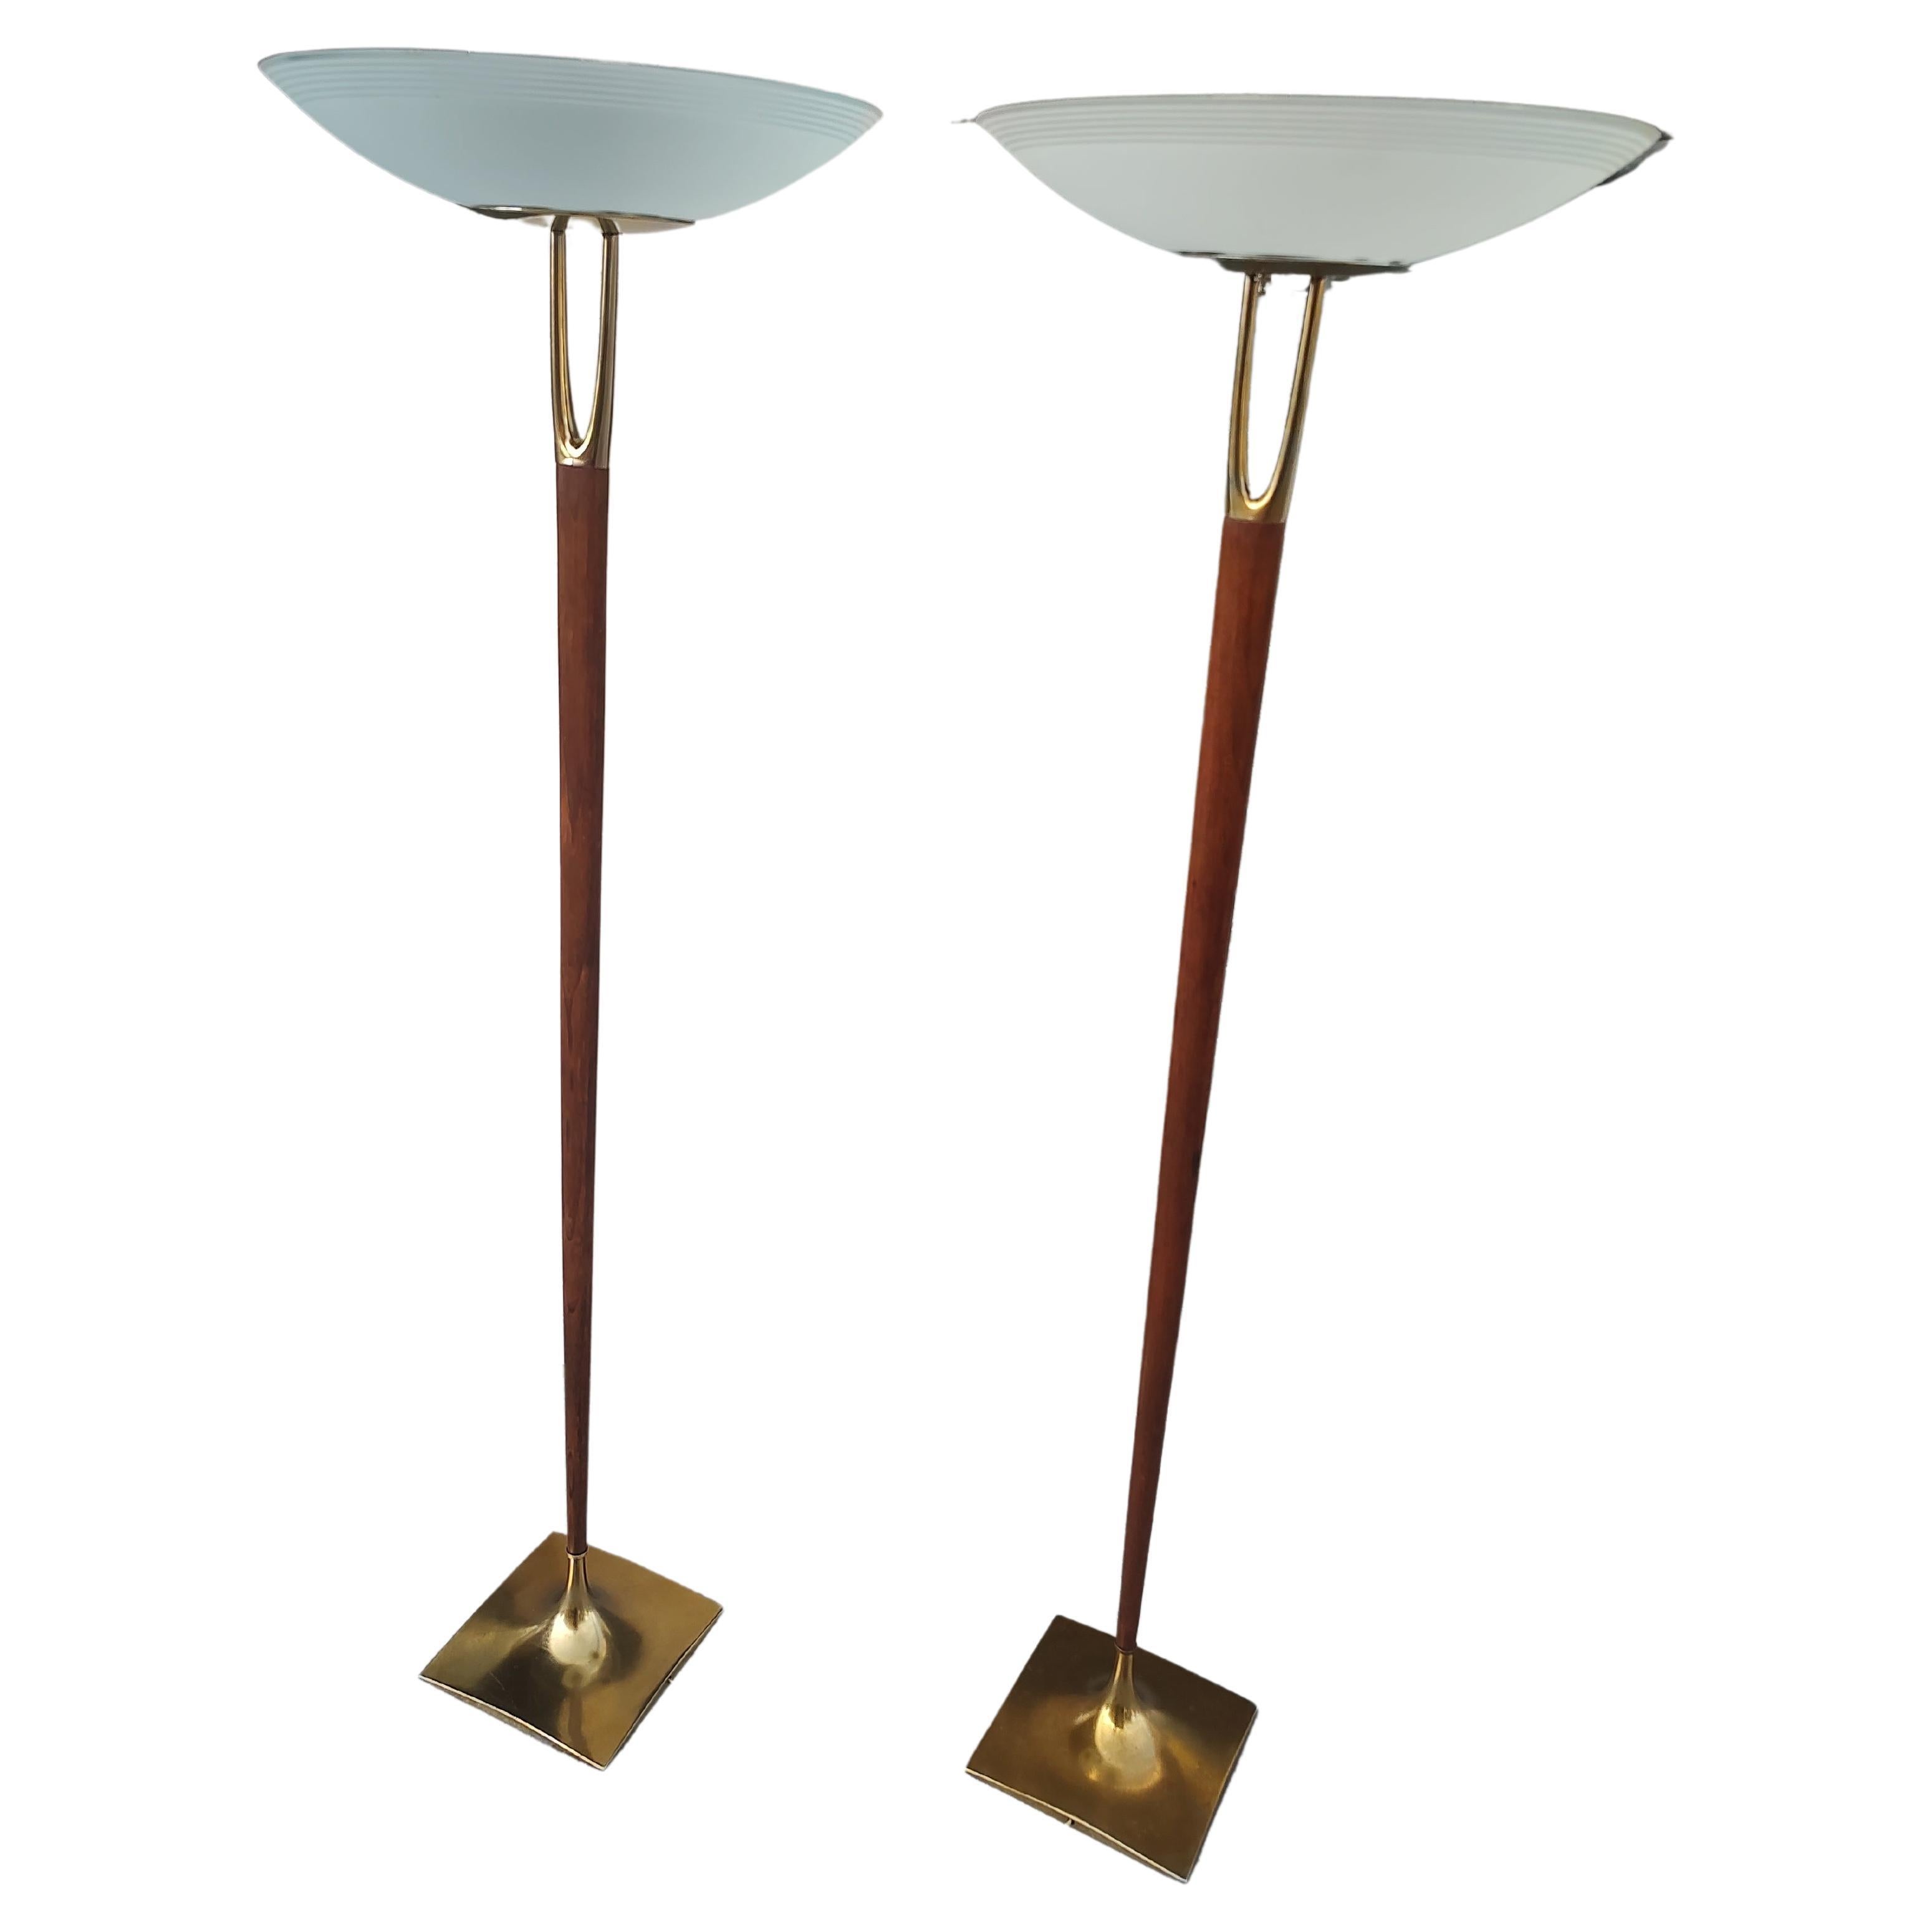 Pair of Mid Century Modern Wishbone Floor Lamps by Gerald Thurston for Laurel